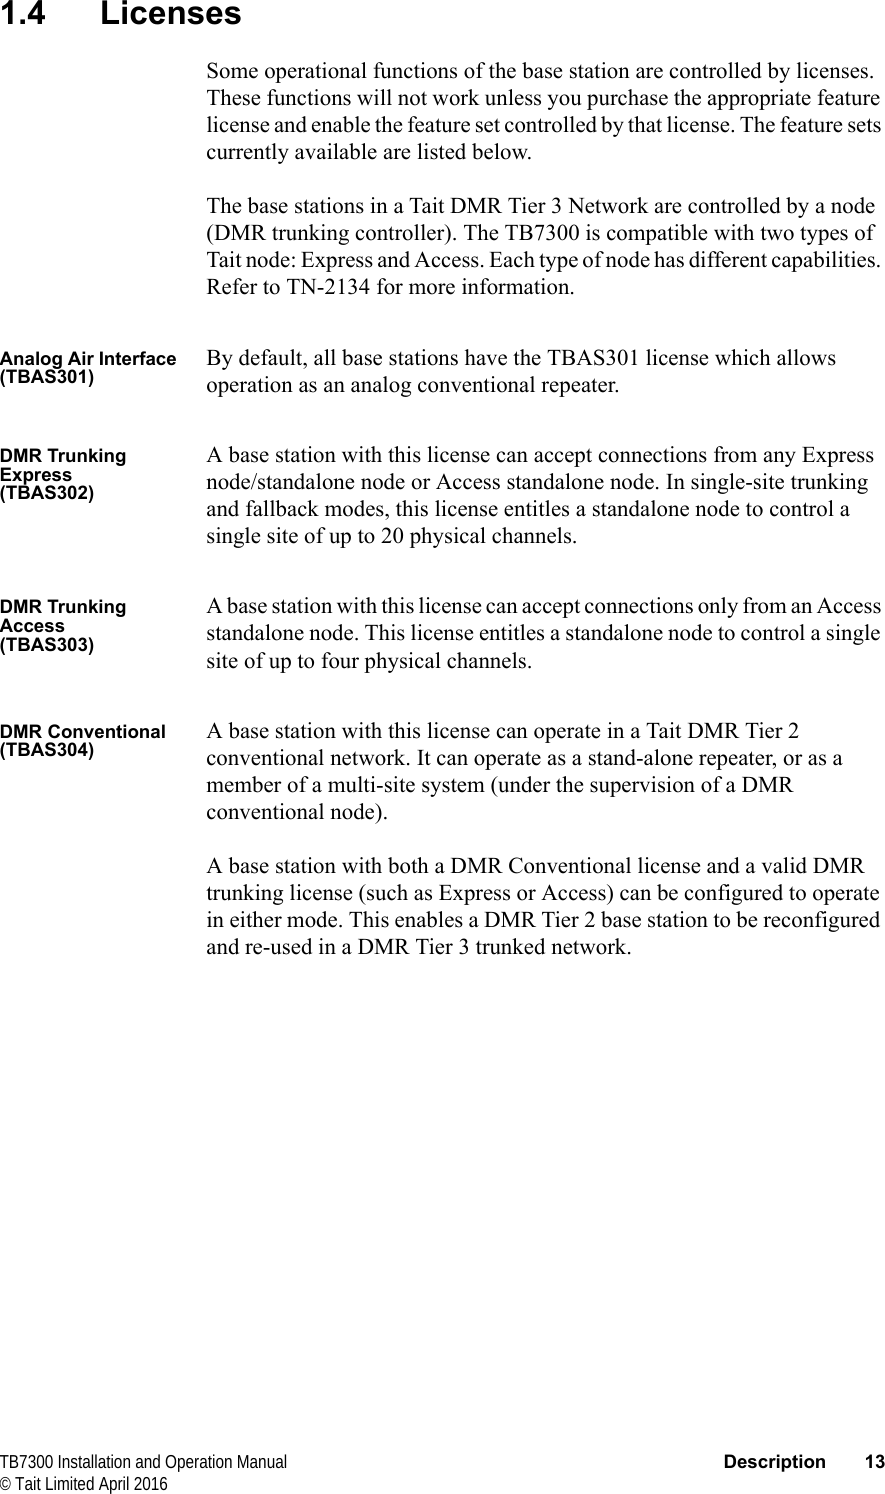  TB7300 Installation and Operation Manual Description 13© Tait Limited April 20161.4 LicensesSome operational functions of the base station are controlled by licenses. These functions will not work unless you purchase the appropriate feature license and enable the feature set controlled by that license. The feature sets currently available are listed below.The base stations in a Tait DMR Tier 3 Network are controlled by a node (DMR trunking controller). The TB7300 is compatible with two types of Tait node: Express and Access. Each type of node has different capabilities. Refer to TN-2134 for more information.Analog Air Interface(TBAS301)By default, all base stations have the TBAS301 license which allows operation as an analog conventional repeater.DMR Trunking Express(TBAS302)A base station with this license can accept connections from any Express node/standalone node or Access standalone node. In single-site trunking and fallback modes, this license entitles a standalone node to control a single site of up to 20 physical channels.DMR Trunking Access(TBAS303)A base station with this license can accept connections only from an Access standalone node. This license entitles a standalone node to control a single site of up to four physical channels.DMR Conventional(TBAS304)A base station with this license can operate in a Tait DMR Tier 2 conventional network. It can operate as a stand-alone repeater, or as a member of a multi-site system (under the supervision of a DMR conventional node).A base station with both a DMR Conventional license and a valid DMR trunking license (such as Express or Access) can be configured to operate in either mode. This enables a DMR Tier 2 base station to be reconfigured and re-used in a DMR Tier 3 trunked network.